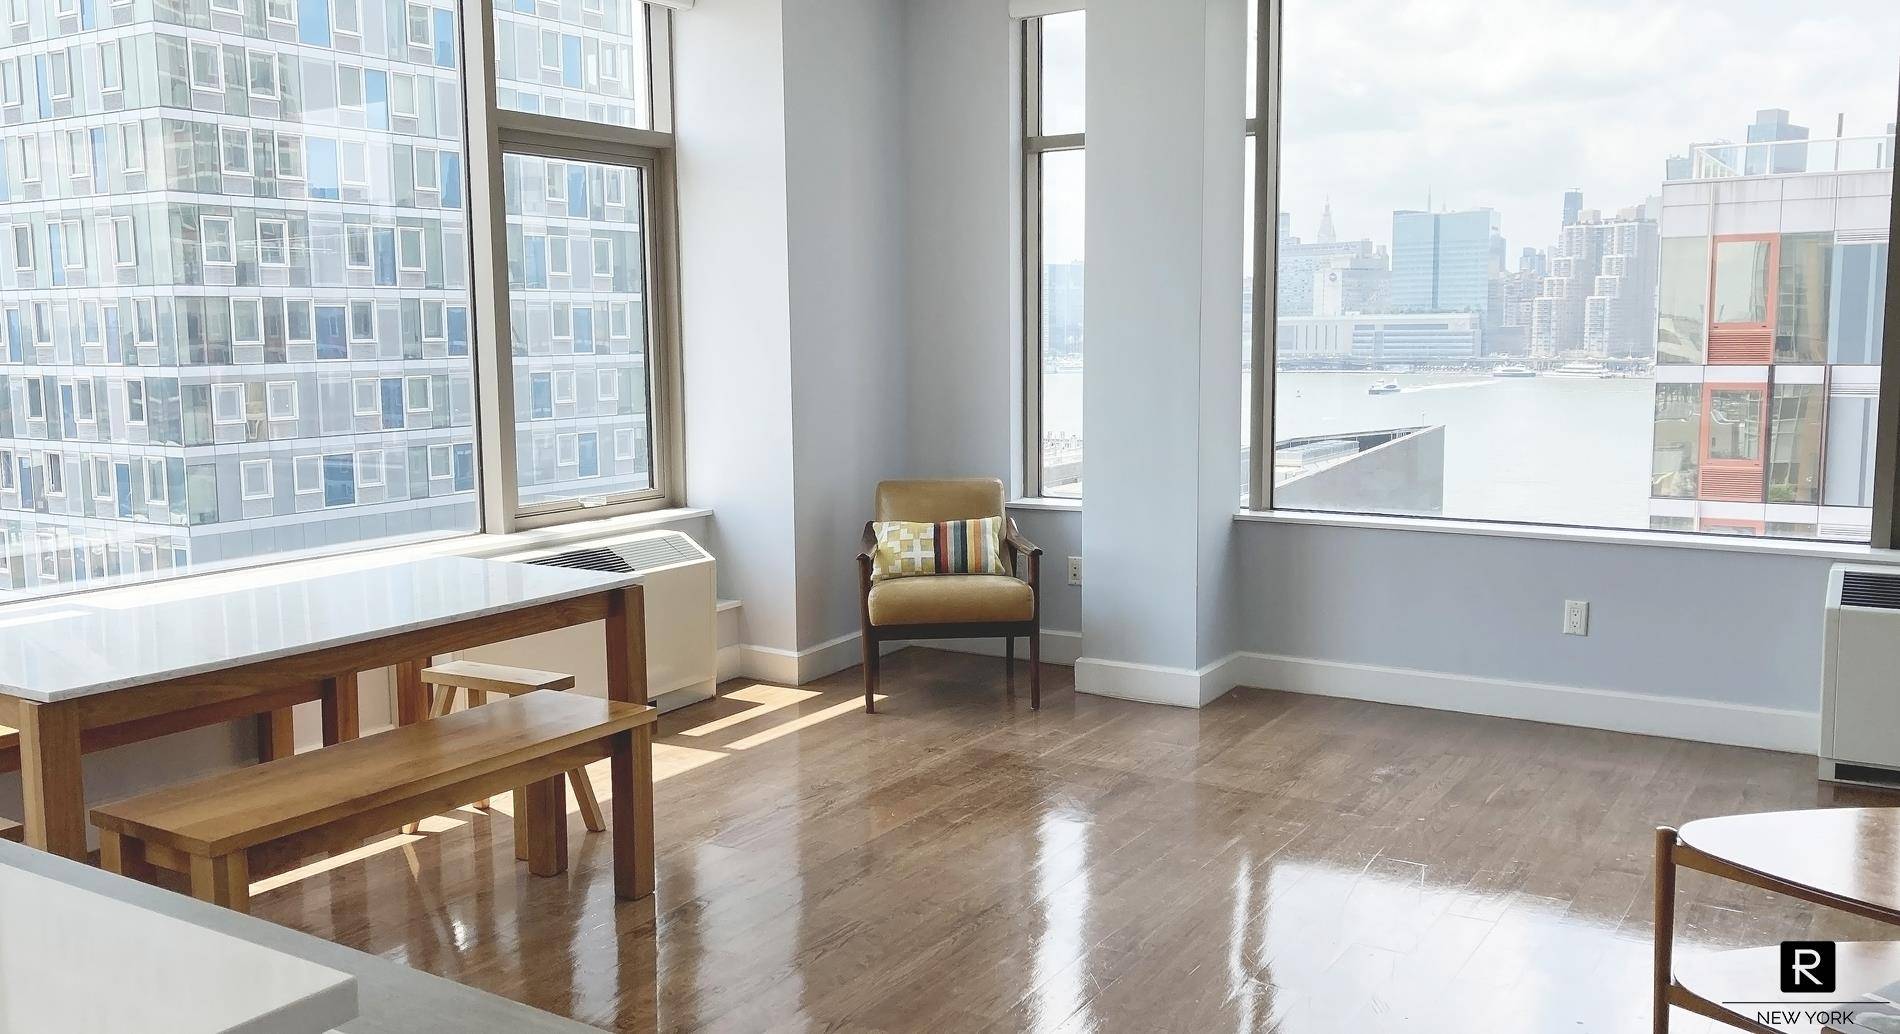 This gorgeous sun filled luxury condominium with 2 bedrooms and 2 full baths is conveniently located on the Long Island City Waterfront.